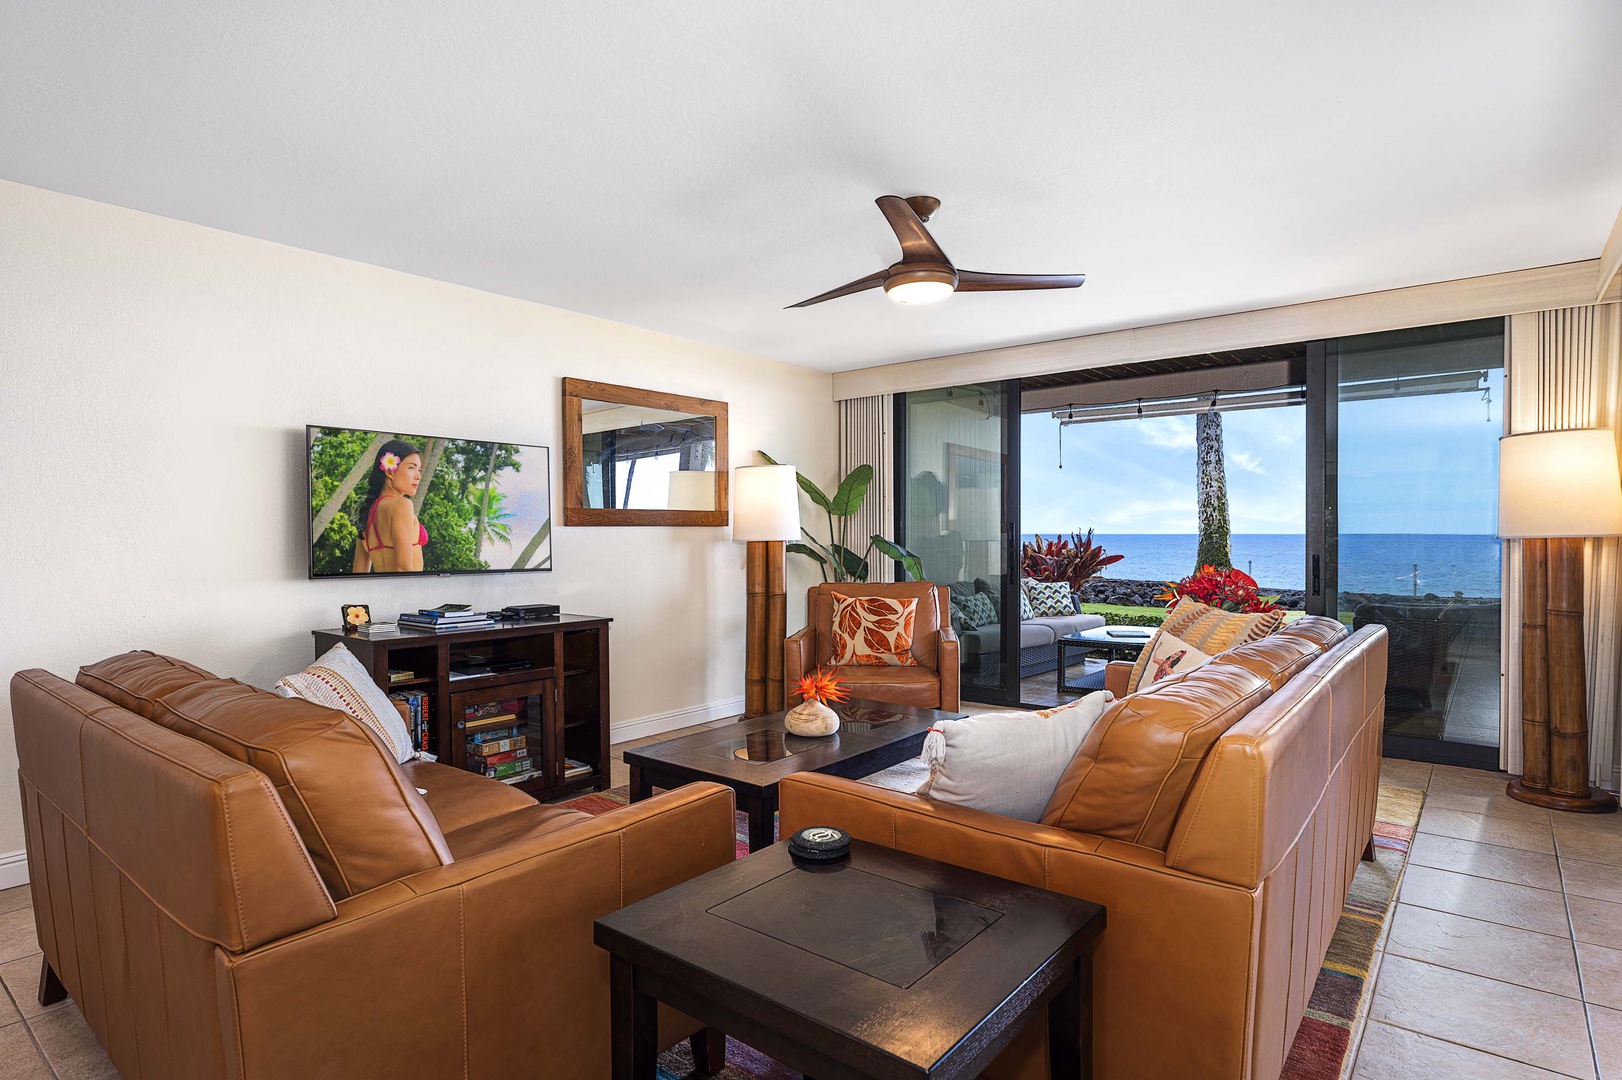 Kailua Kona Vacation Rentals, Keauhou Kona Surf & Racquet 2101 - Equipped with glass sliders for an easy access to the lanai.